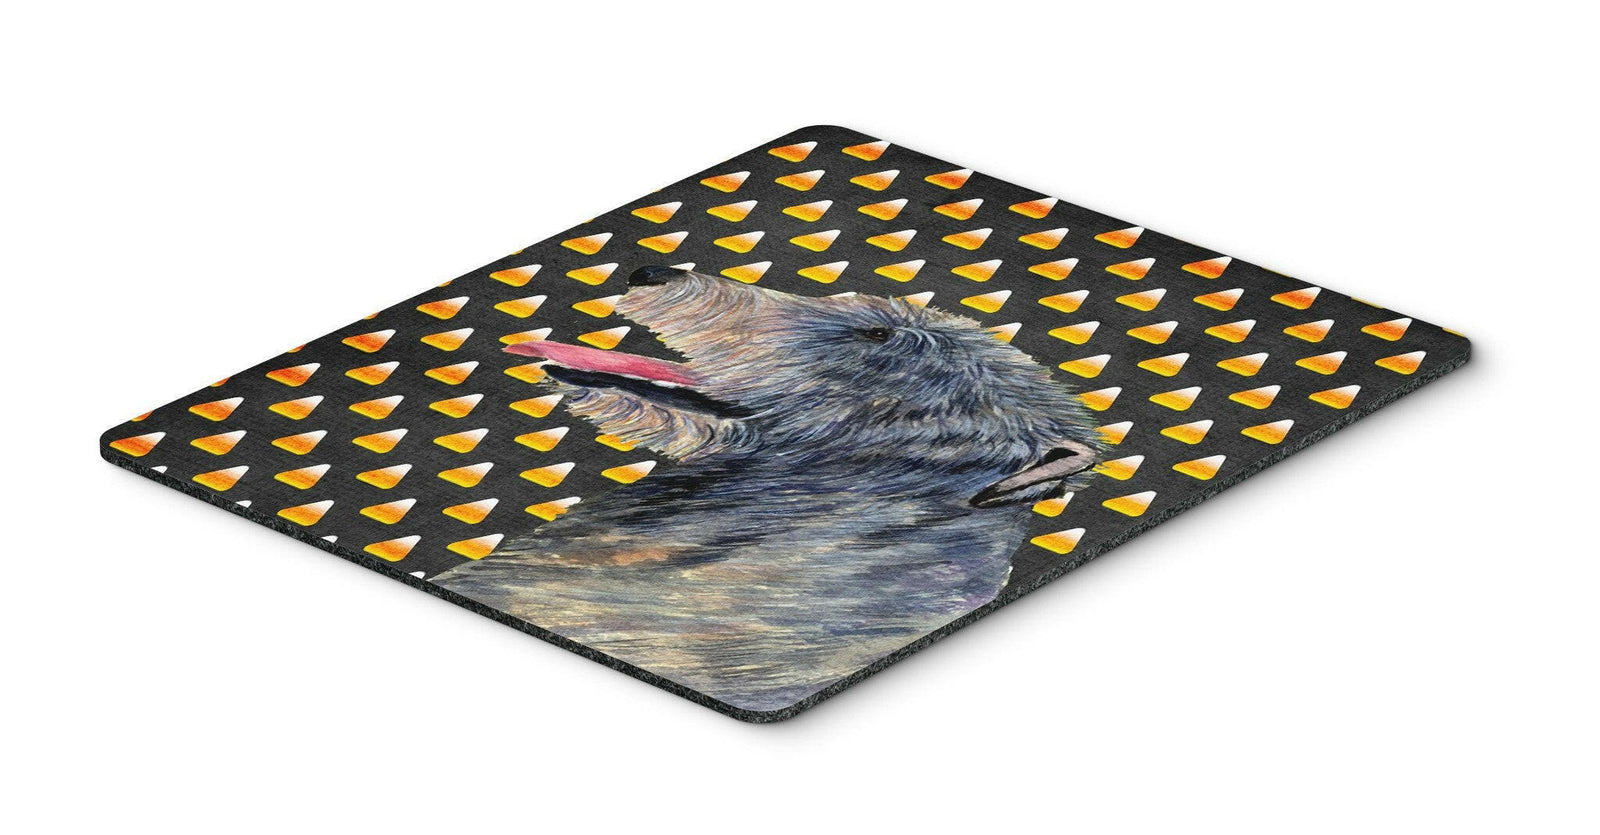 Irish Wolfhound Candy Corn Halloween Portrait Mouse Pad, Hot Pad or Trivet by Caroline's Treasures